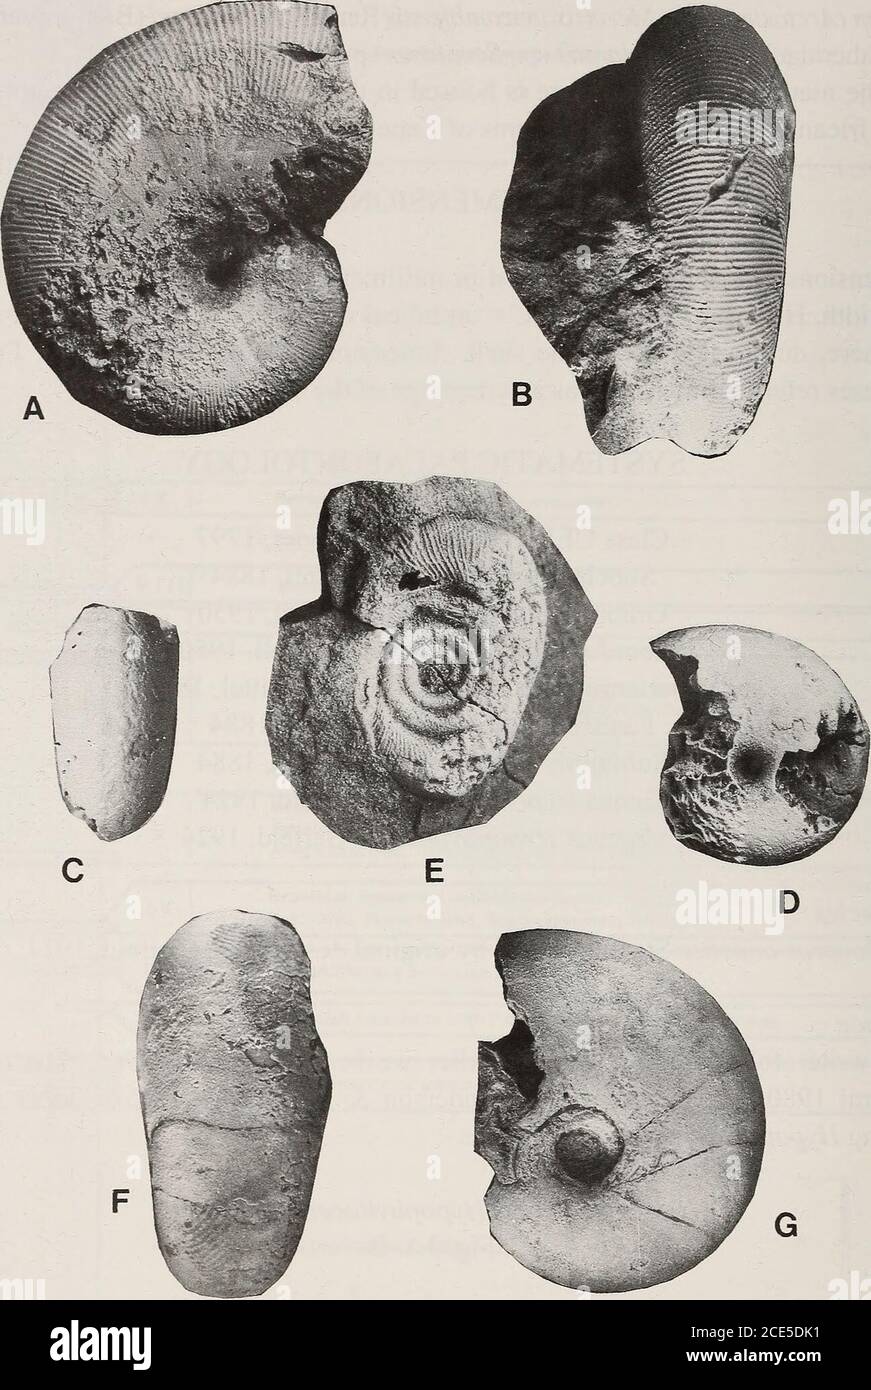 . Annals of the South African Museum = Annale van die Suid-Afrikaanse Museum . e shell diameter. SYSTEMATIC PALAEONTOLOGY Class CEPHALOPODA Cuvier, 1797 Subclass AMMONOIDEA Zittel, 1884 Order PHYLLOCERATIDA Arkell, 1950 Suborder PHYLLOCERATINA Arkell, 1950 Superfamily PHYLLOCERATACEAE Zittel, 1884 Family Phylloceratidae Zittel, 1884 Subfamily Phylloceratinae Zittel, 1884 Genus Hypophylloceras Salfeld, 1924 Subgenus Hypophylloceras Salfeld, 1924 Type species Phylloceras onoense Stanton, 1894; by original designation (Salfeld, 1924: 60). Discussion The writer follows a number of earlier workers Stock Photo